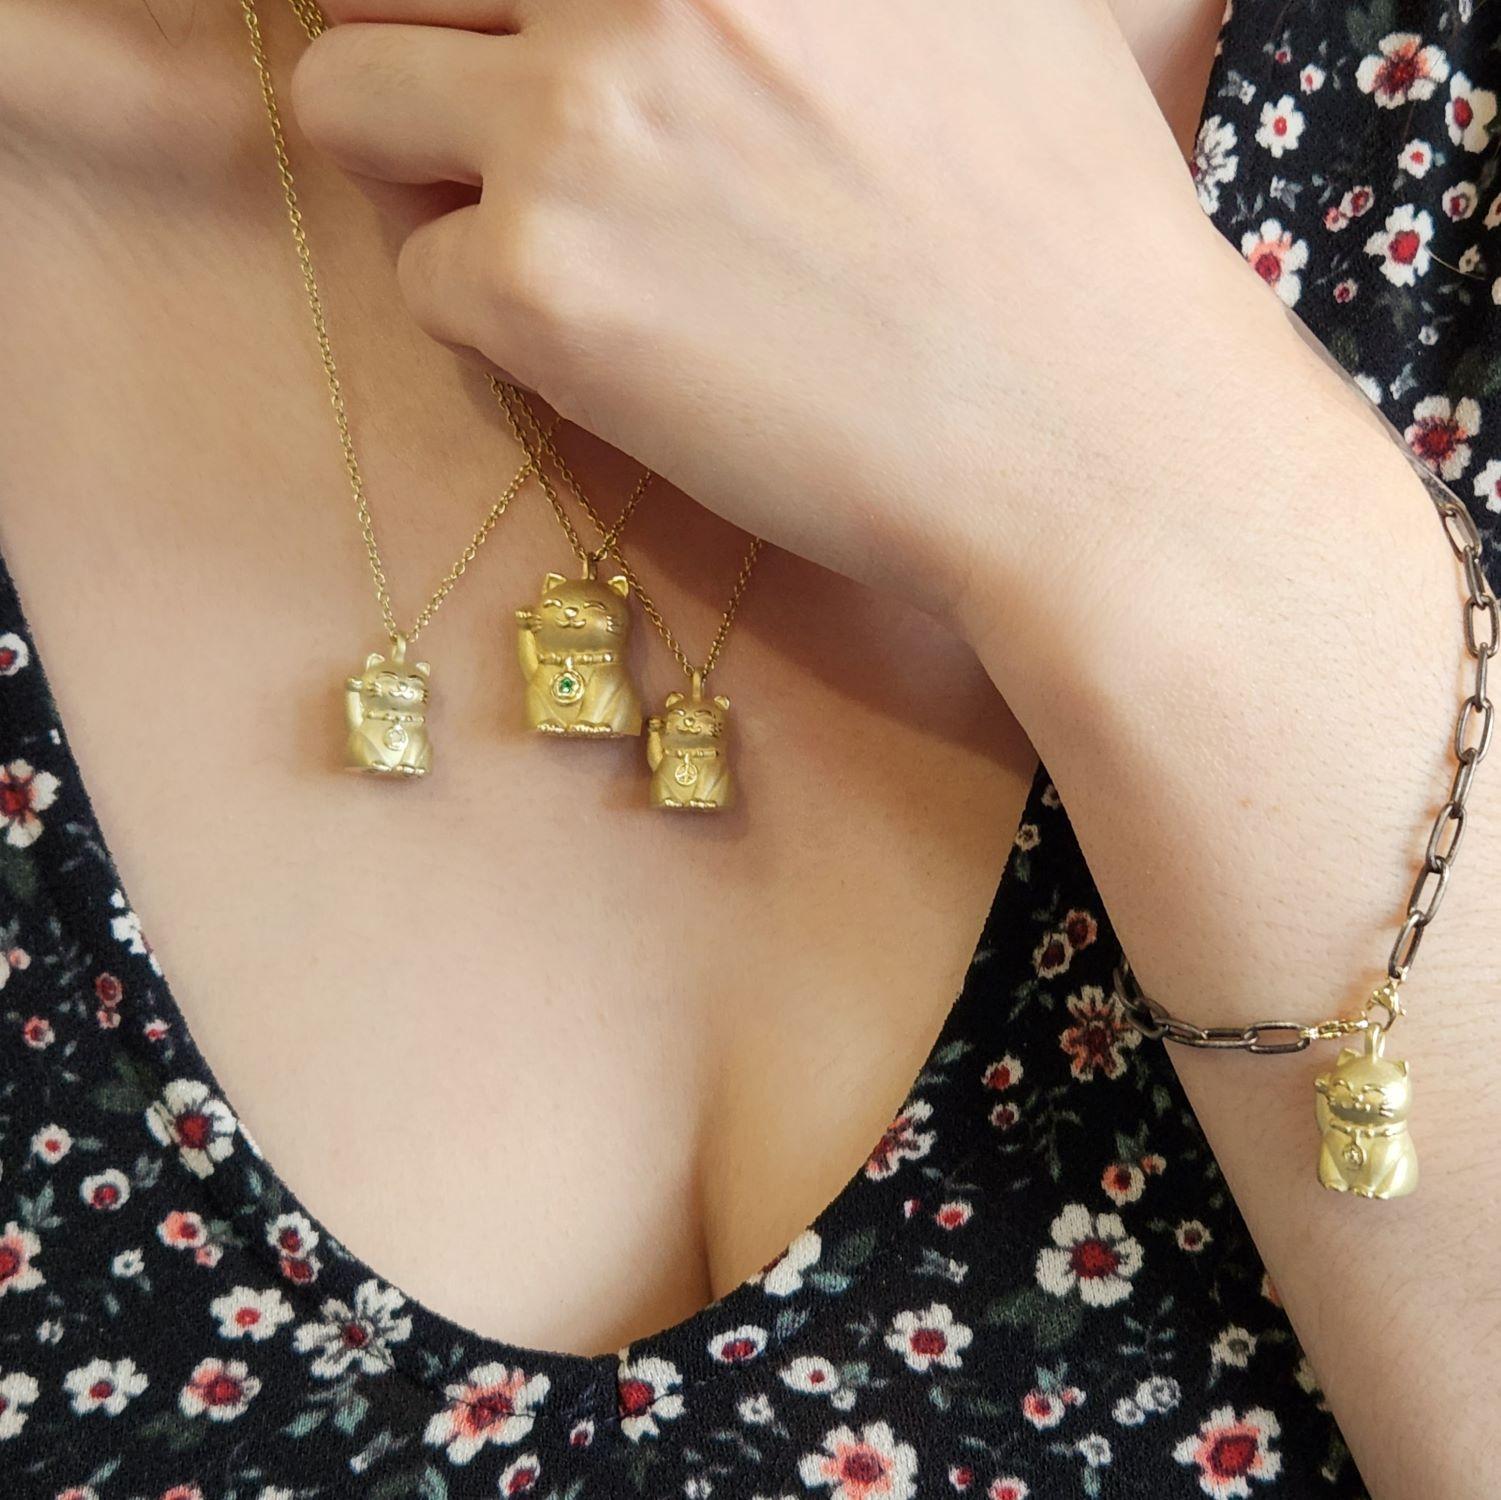 Inspired by the Japanese Maneki Neko welcoming Cat, Alison has reimagined this beloved symbol of a charming, happy, lucky, and inviting/beckoning cat in a variety of sizes, gemstones, and metals.
Alison challenged herself and succeeded to make The